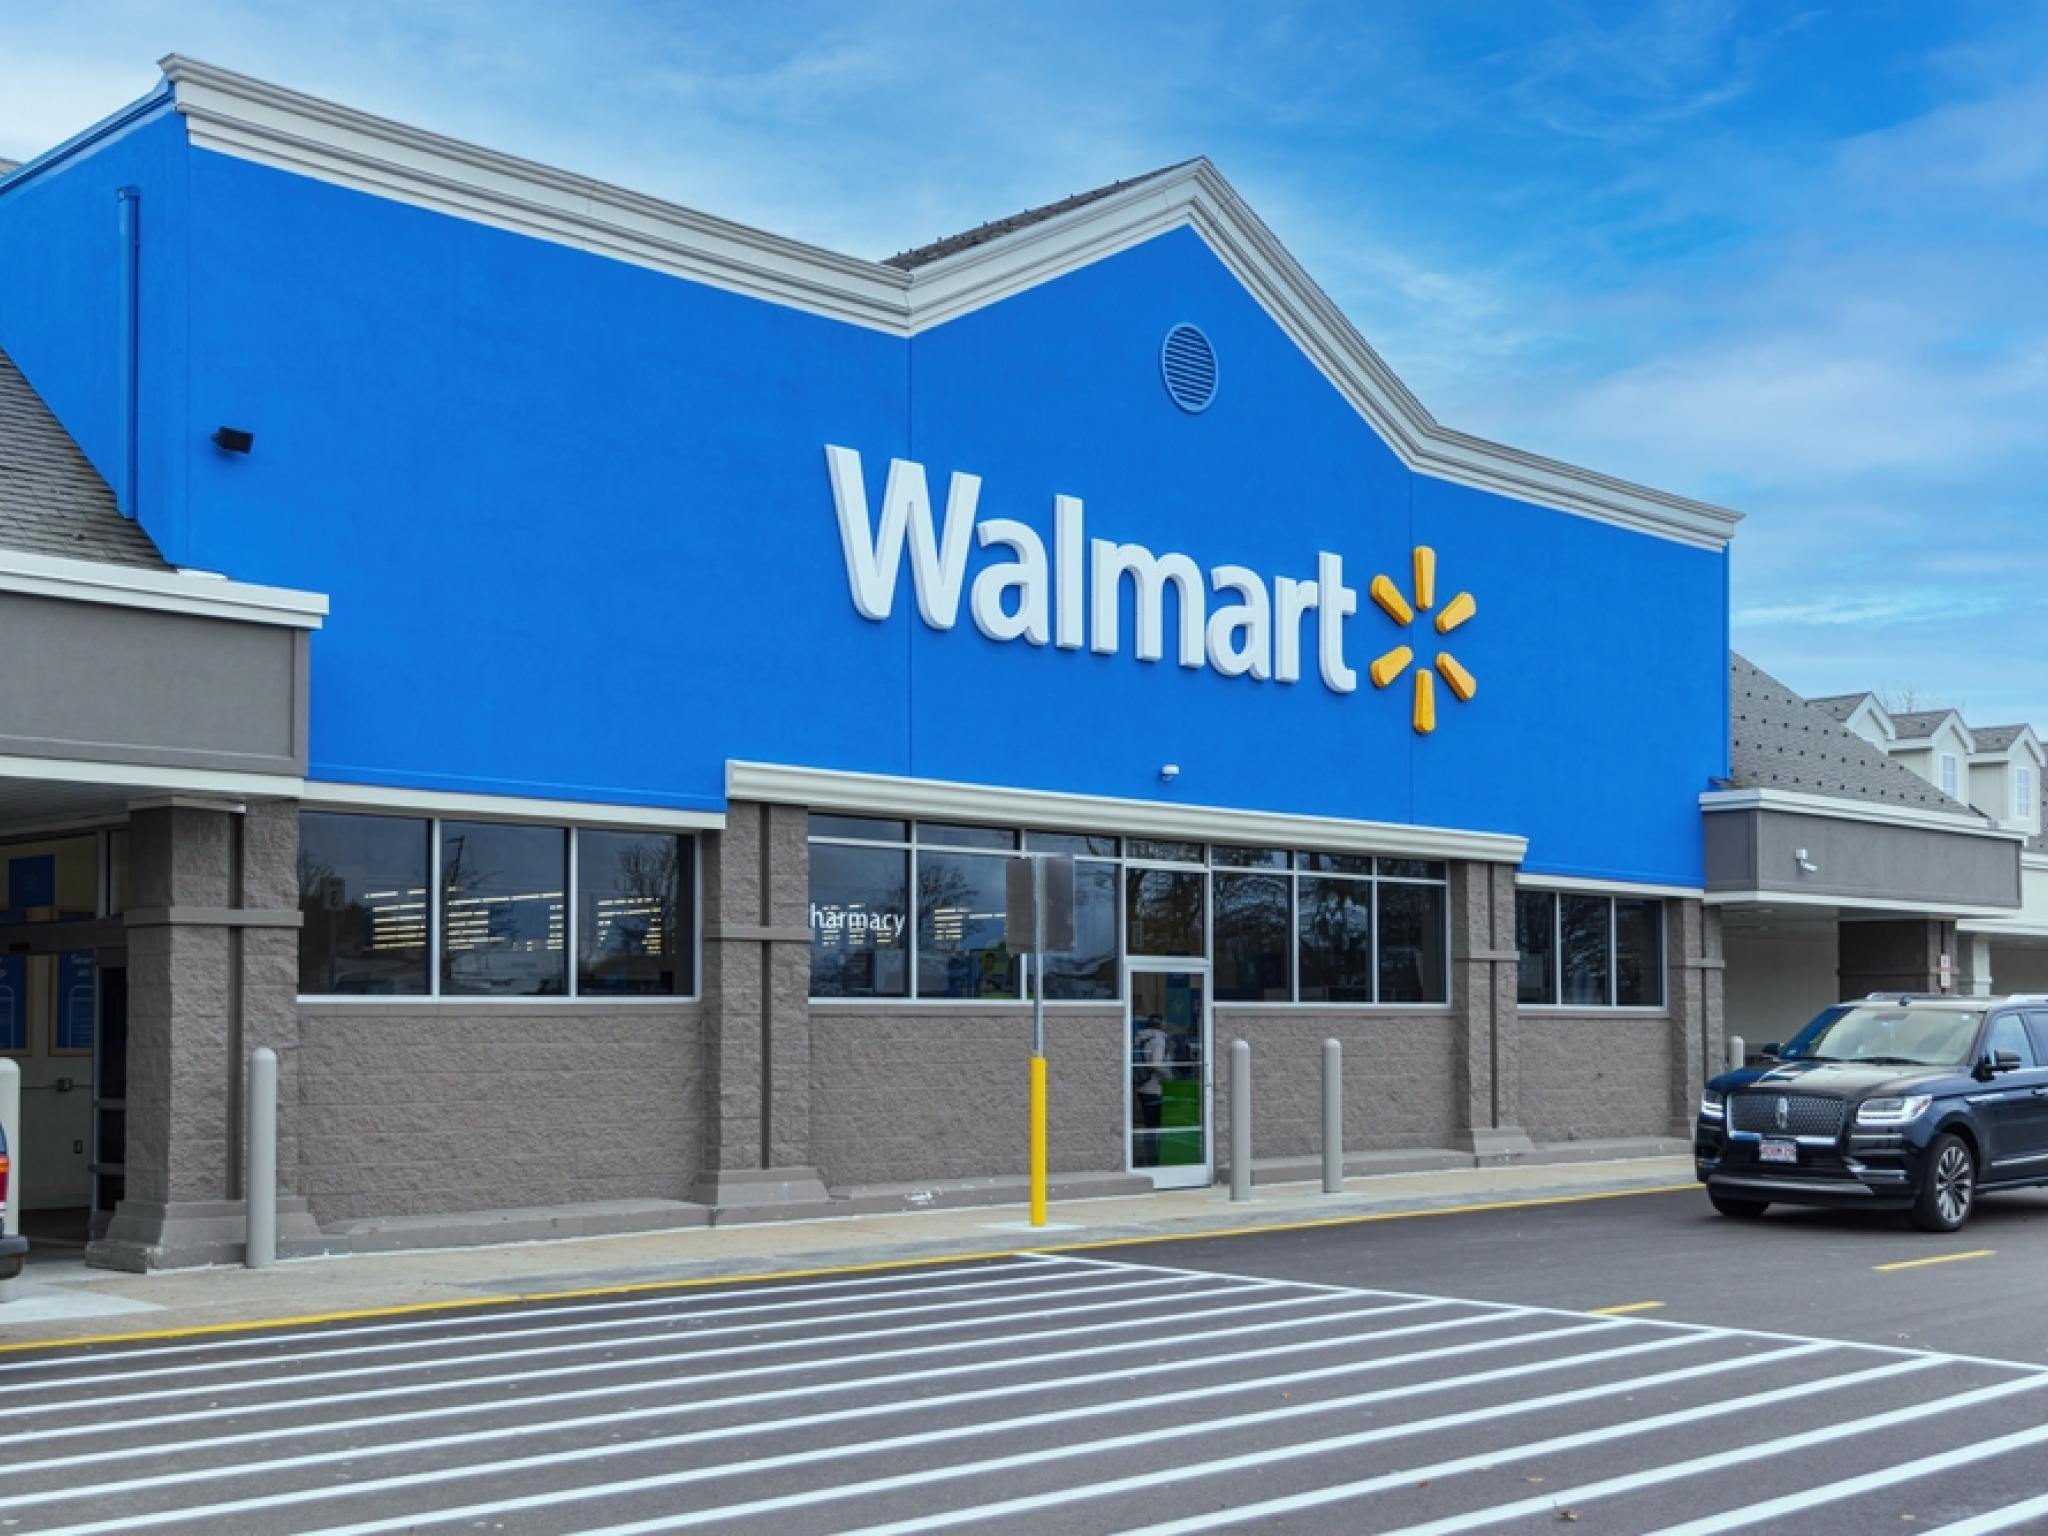  walmart-to-rally-over-17-here-are-10-top-analyst-forecasts-for-friday 